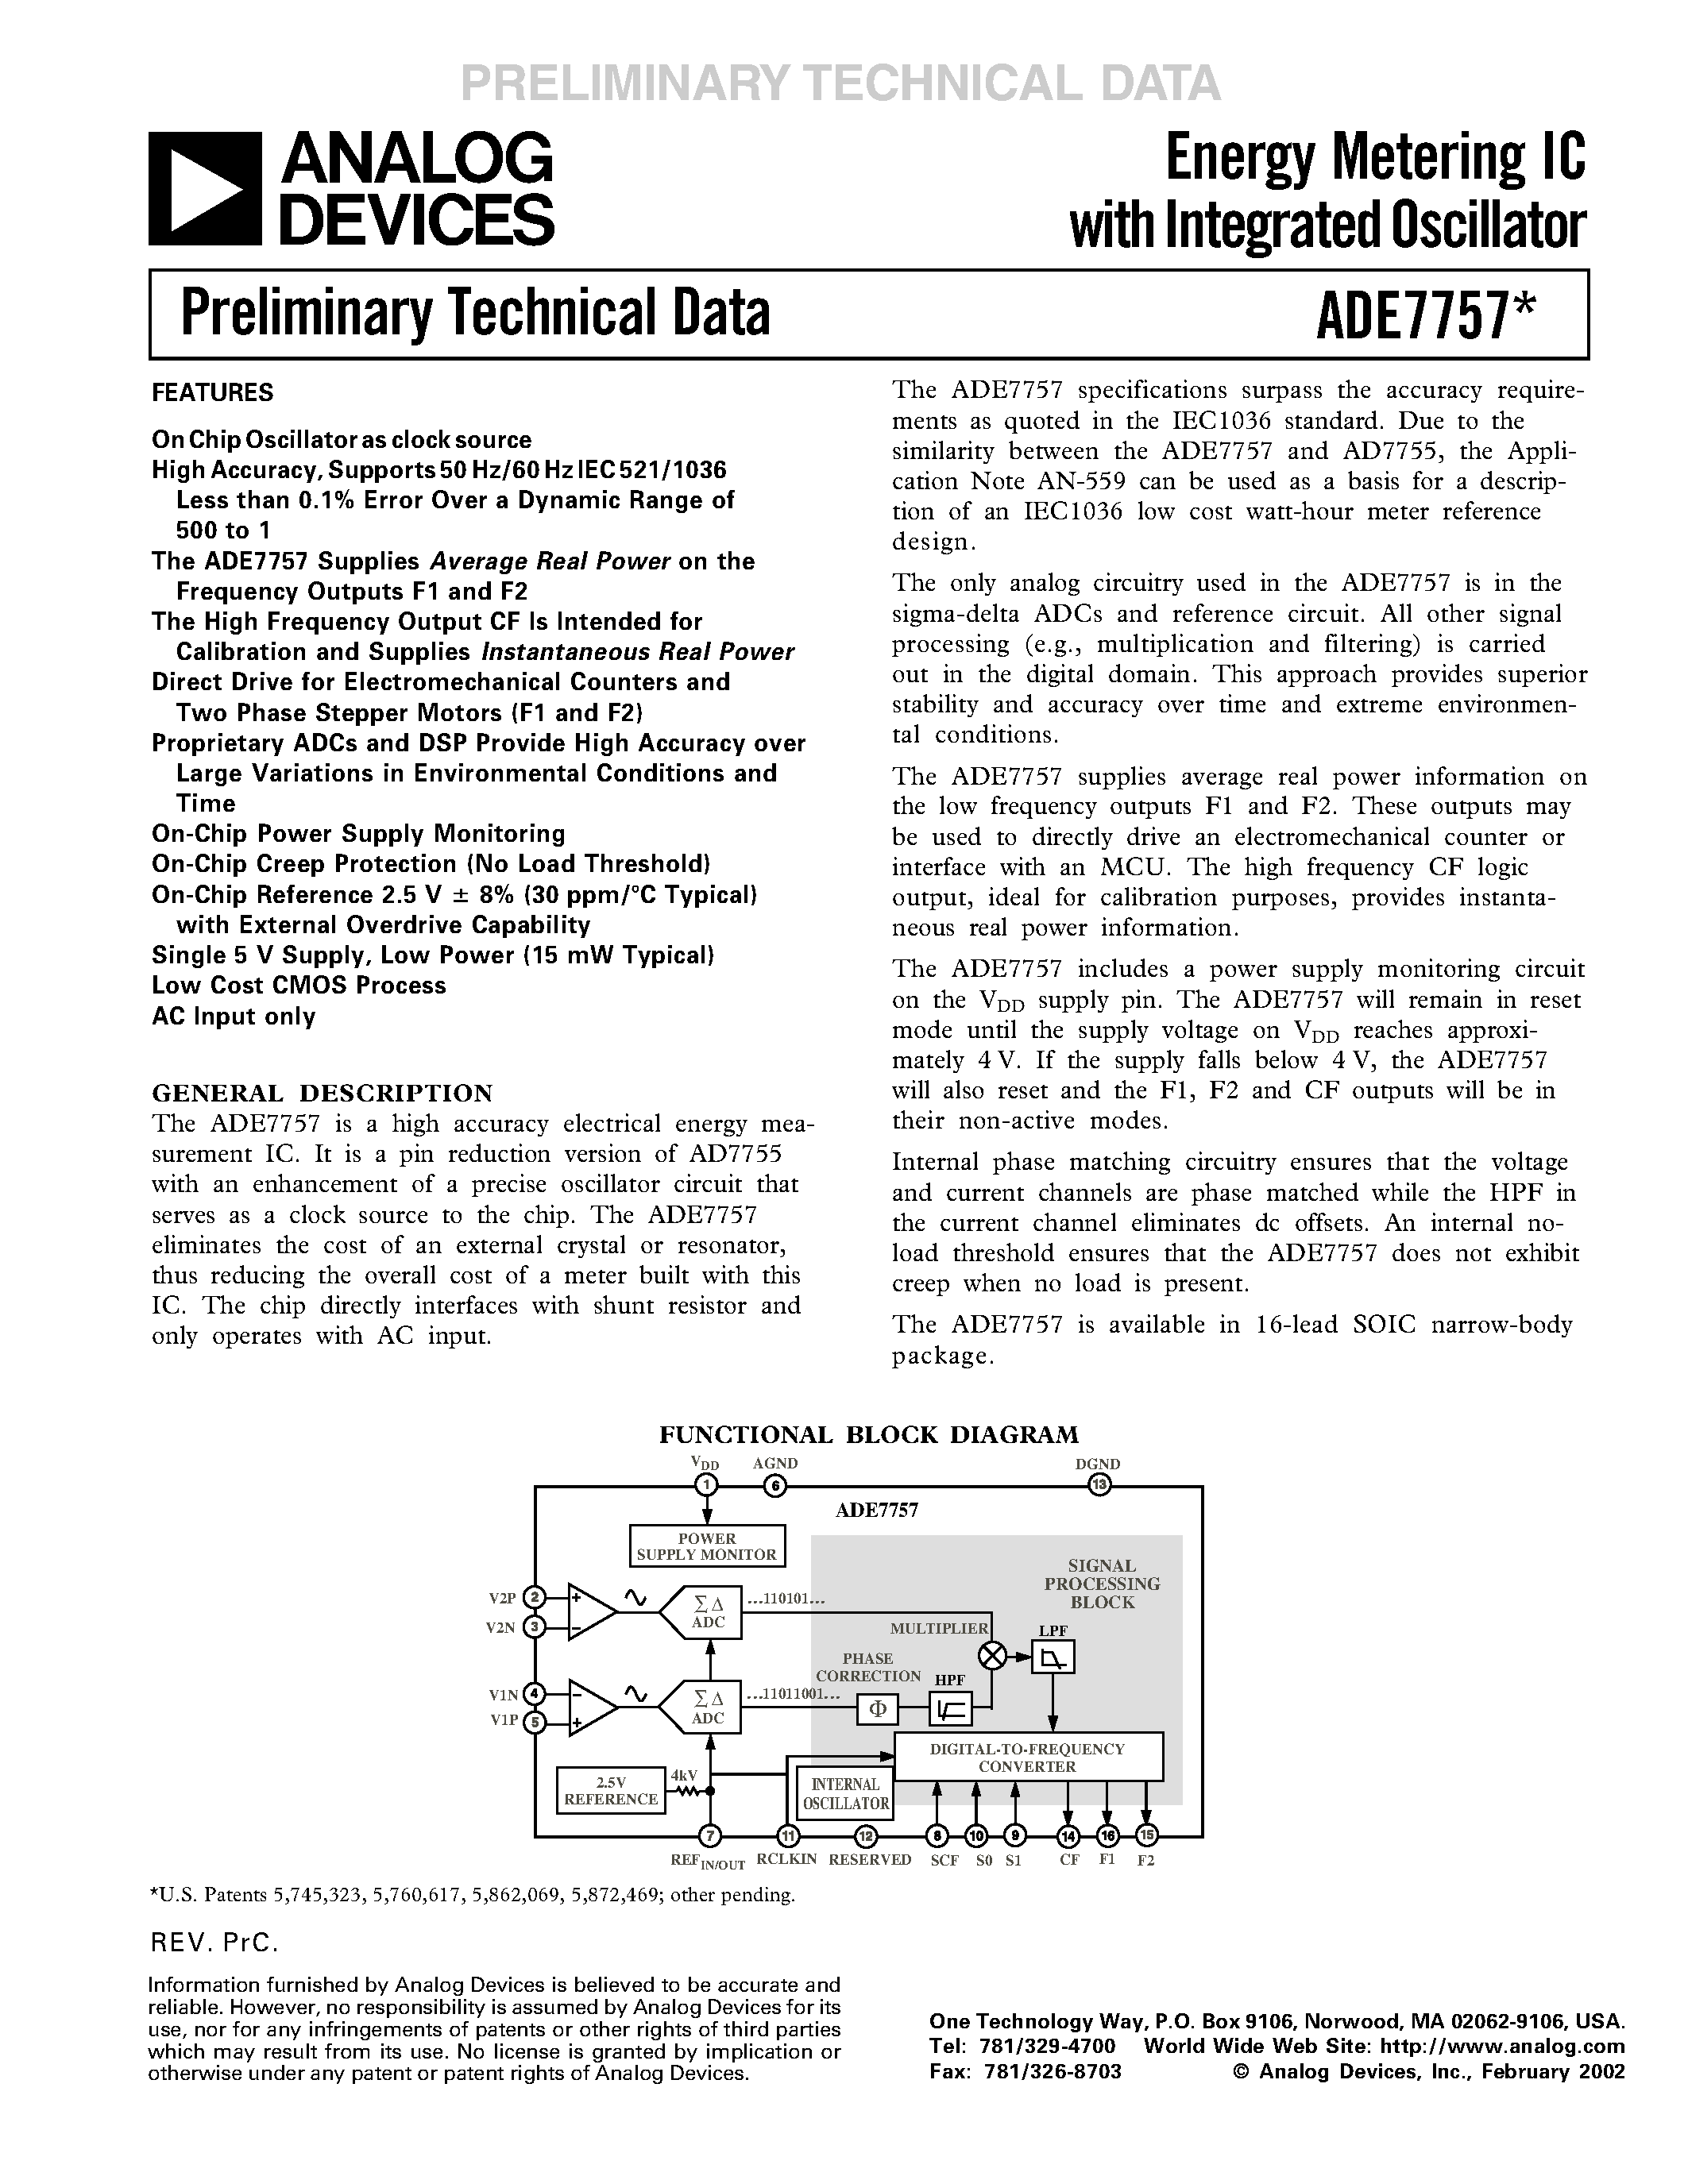 Datasheet ADE7757 - Energy Metering IC with Integrated Oscillator page 1